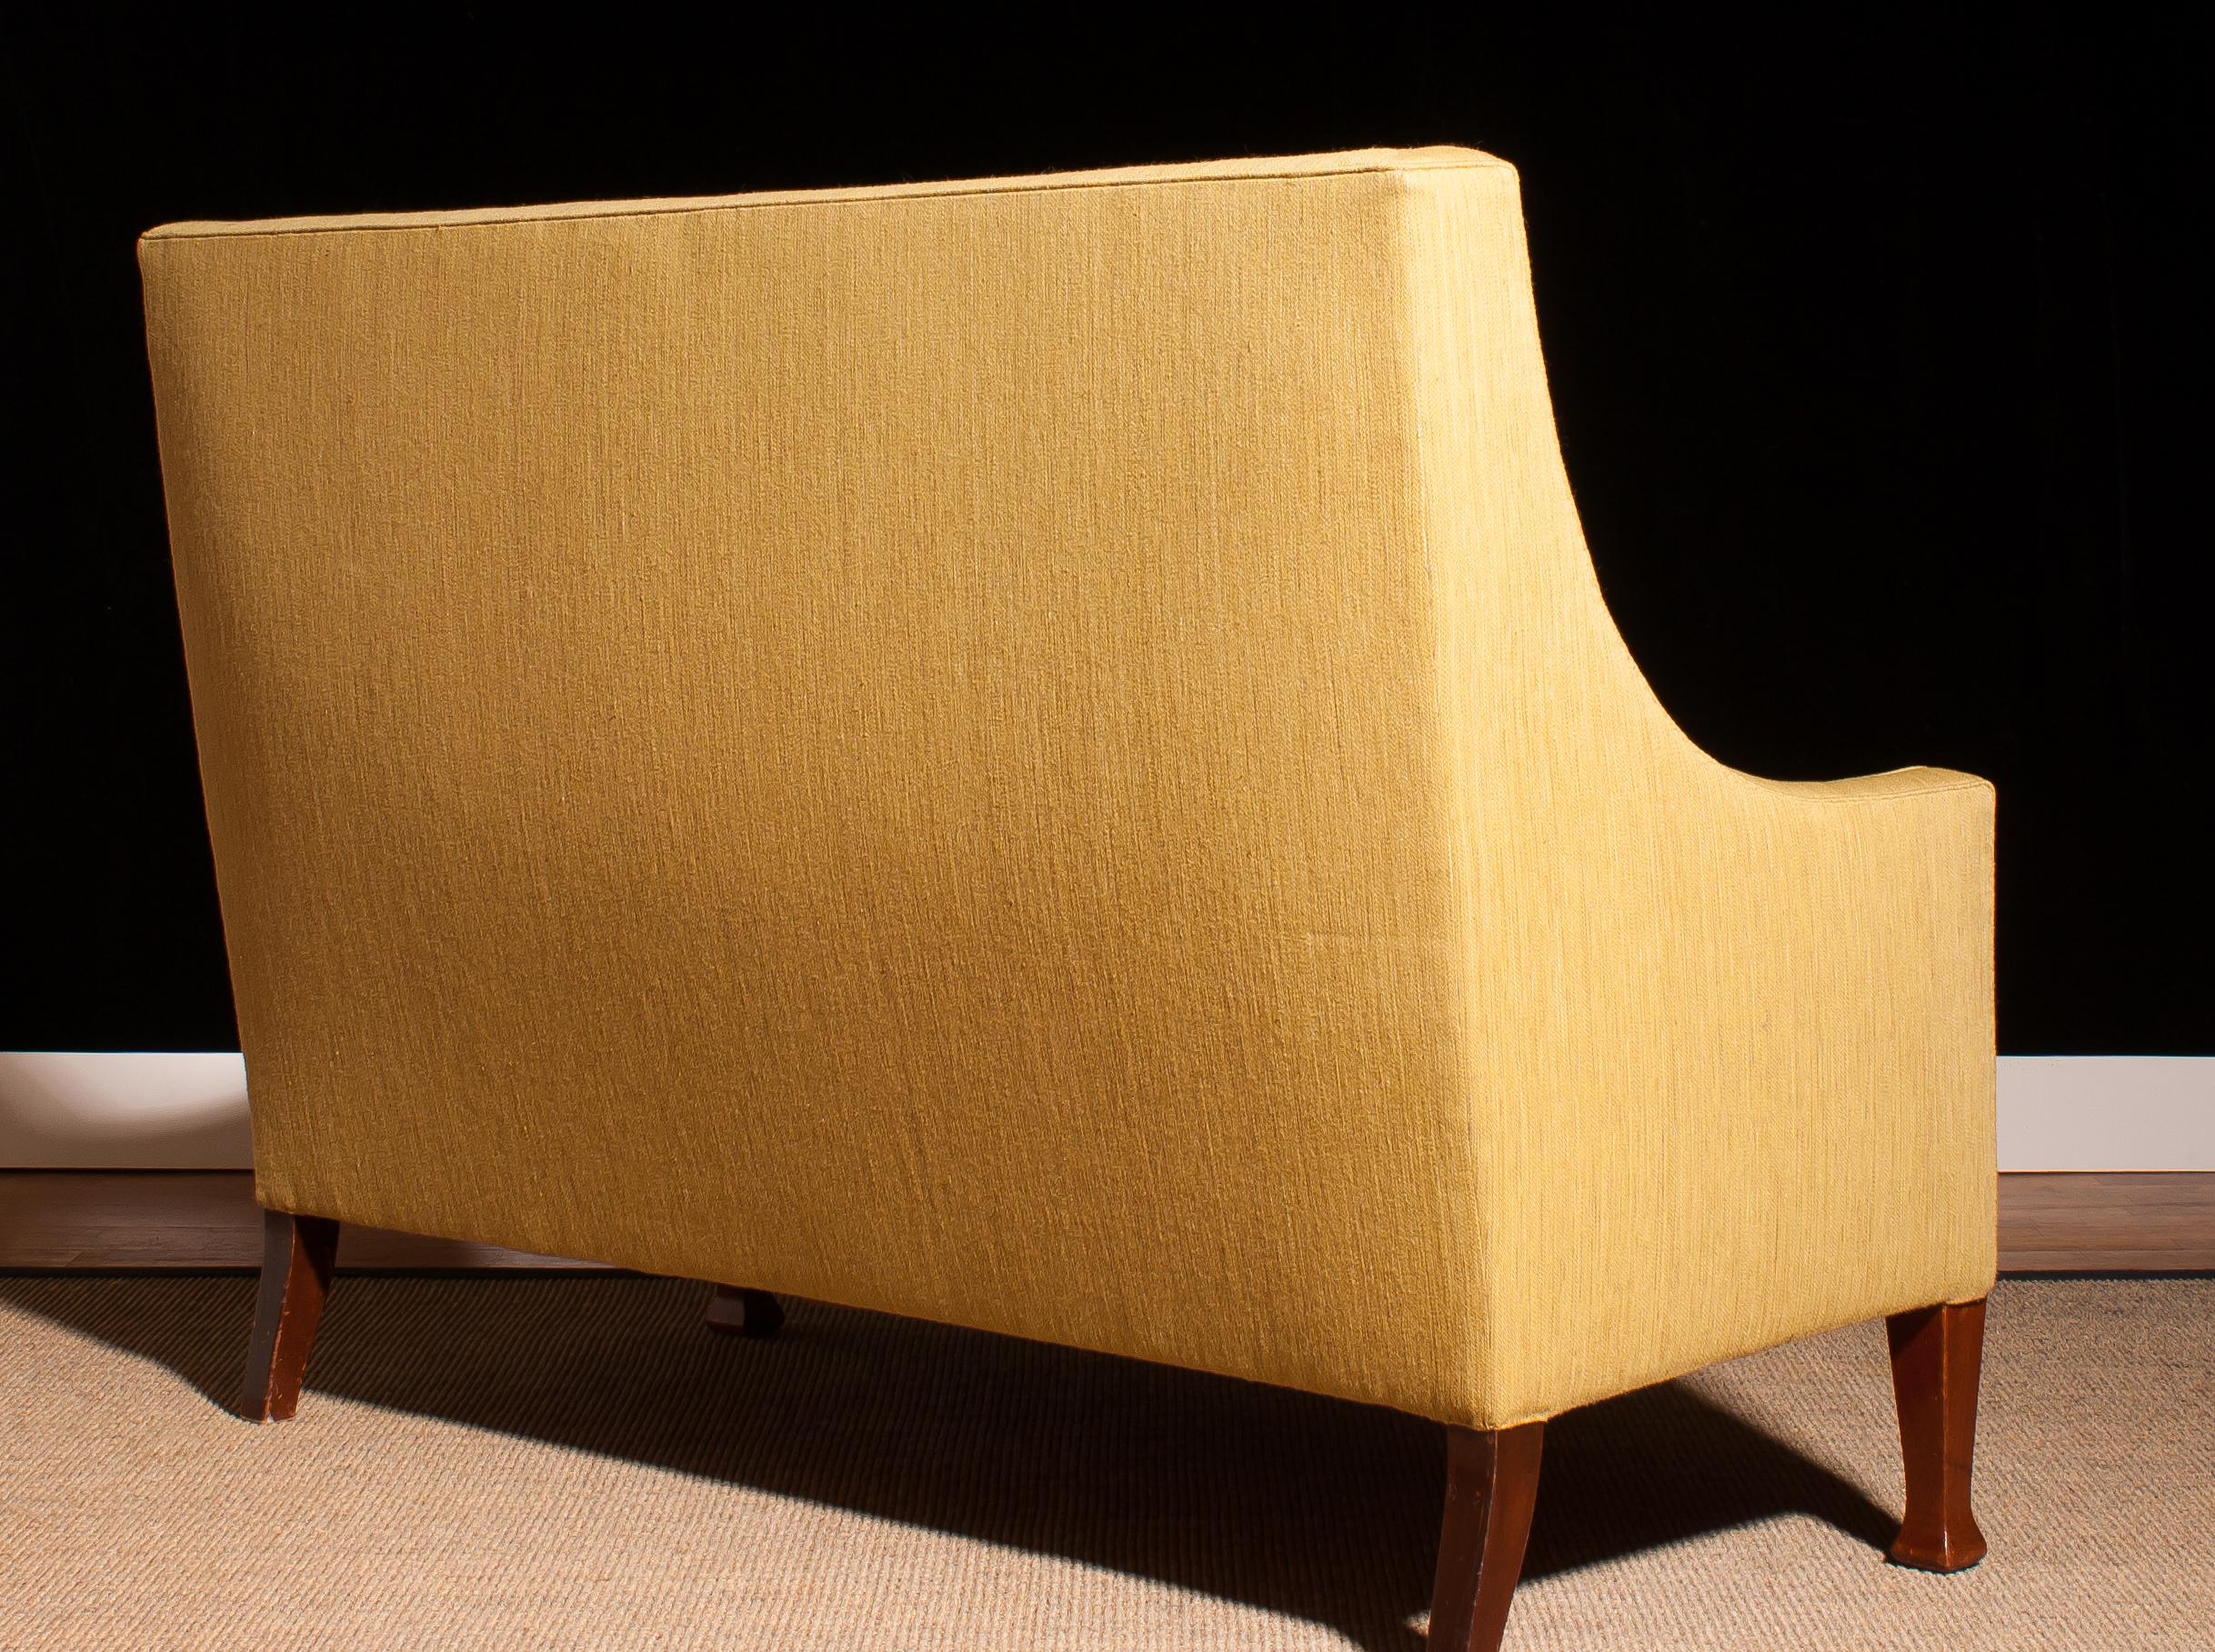 Beautiful high back sofa couch made in Denmark.
The sofa is made of a light yellow fabric on a wooden frame.
It is in a wonderful original condition,
circa 1950s.
Dimensions: H 108 cm, W 148 cm, D 75 cm, SH 46 cm.